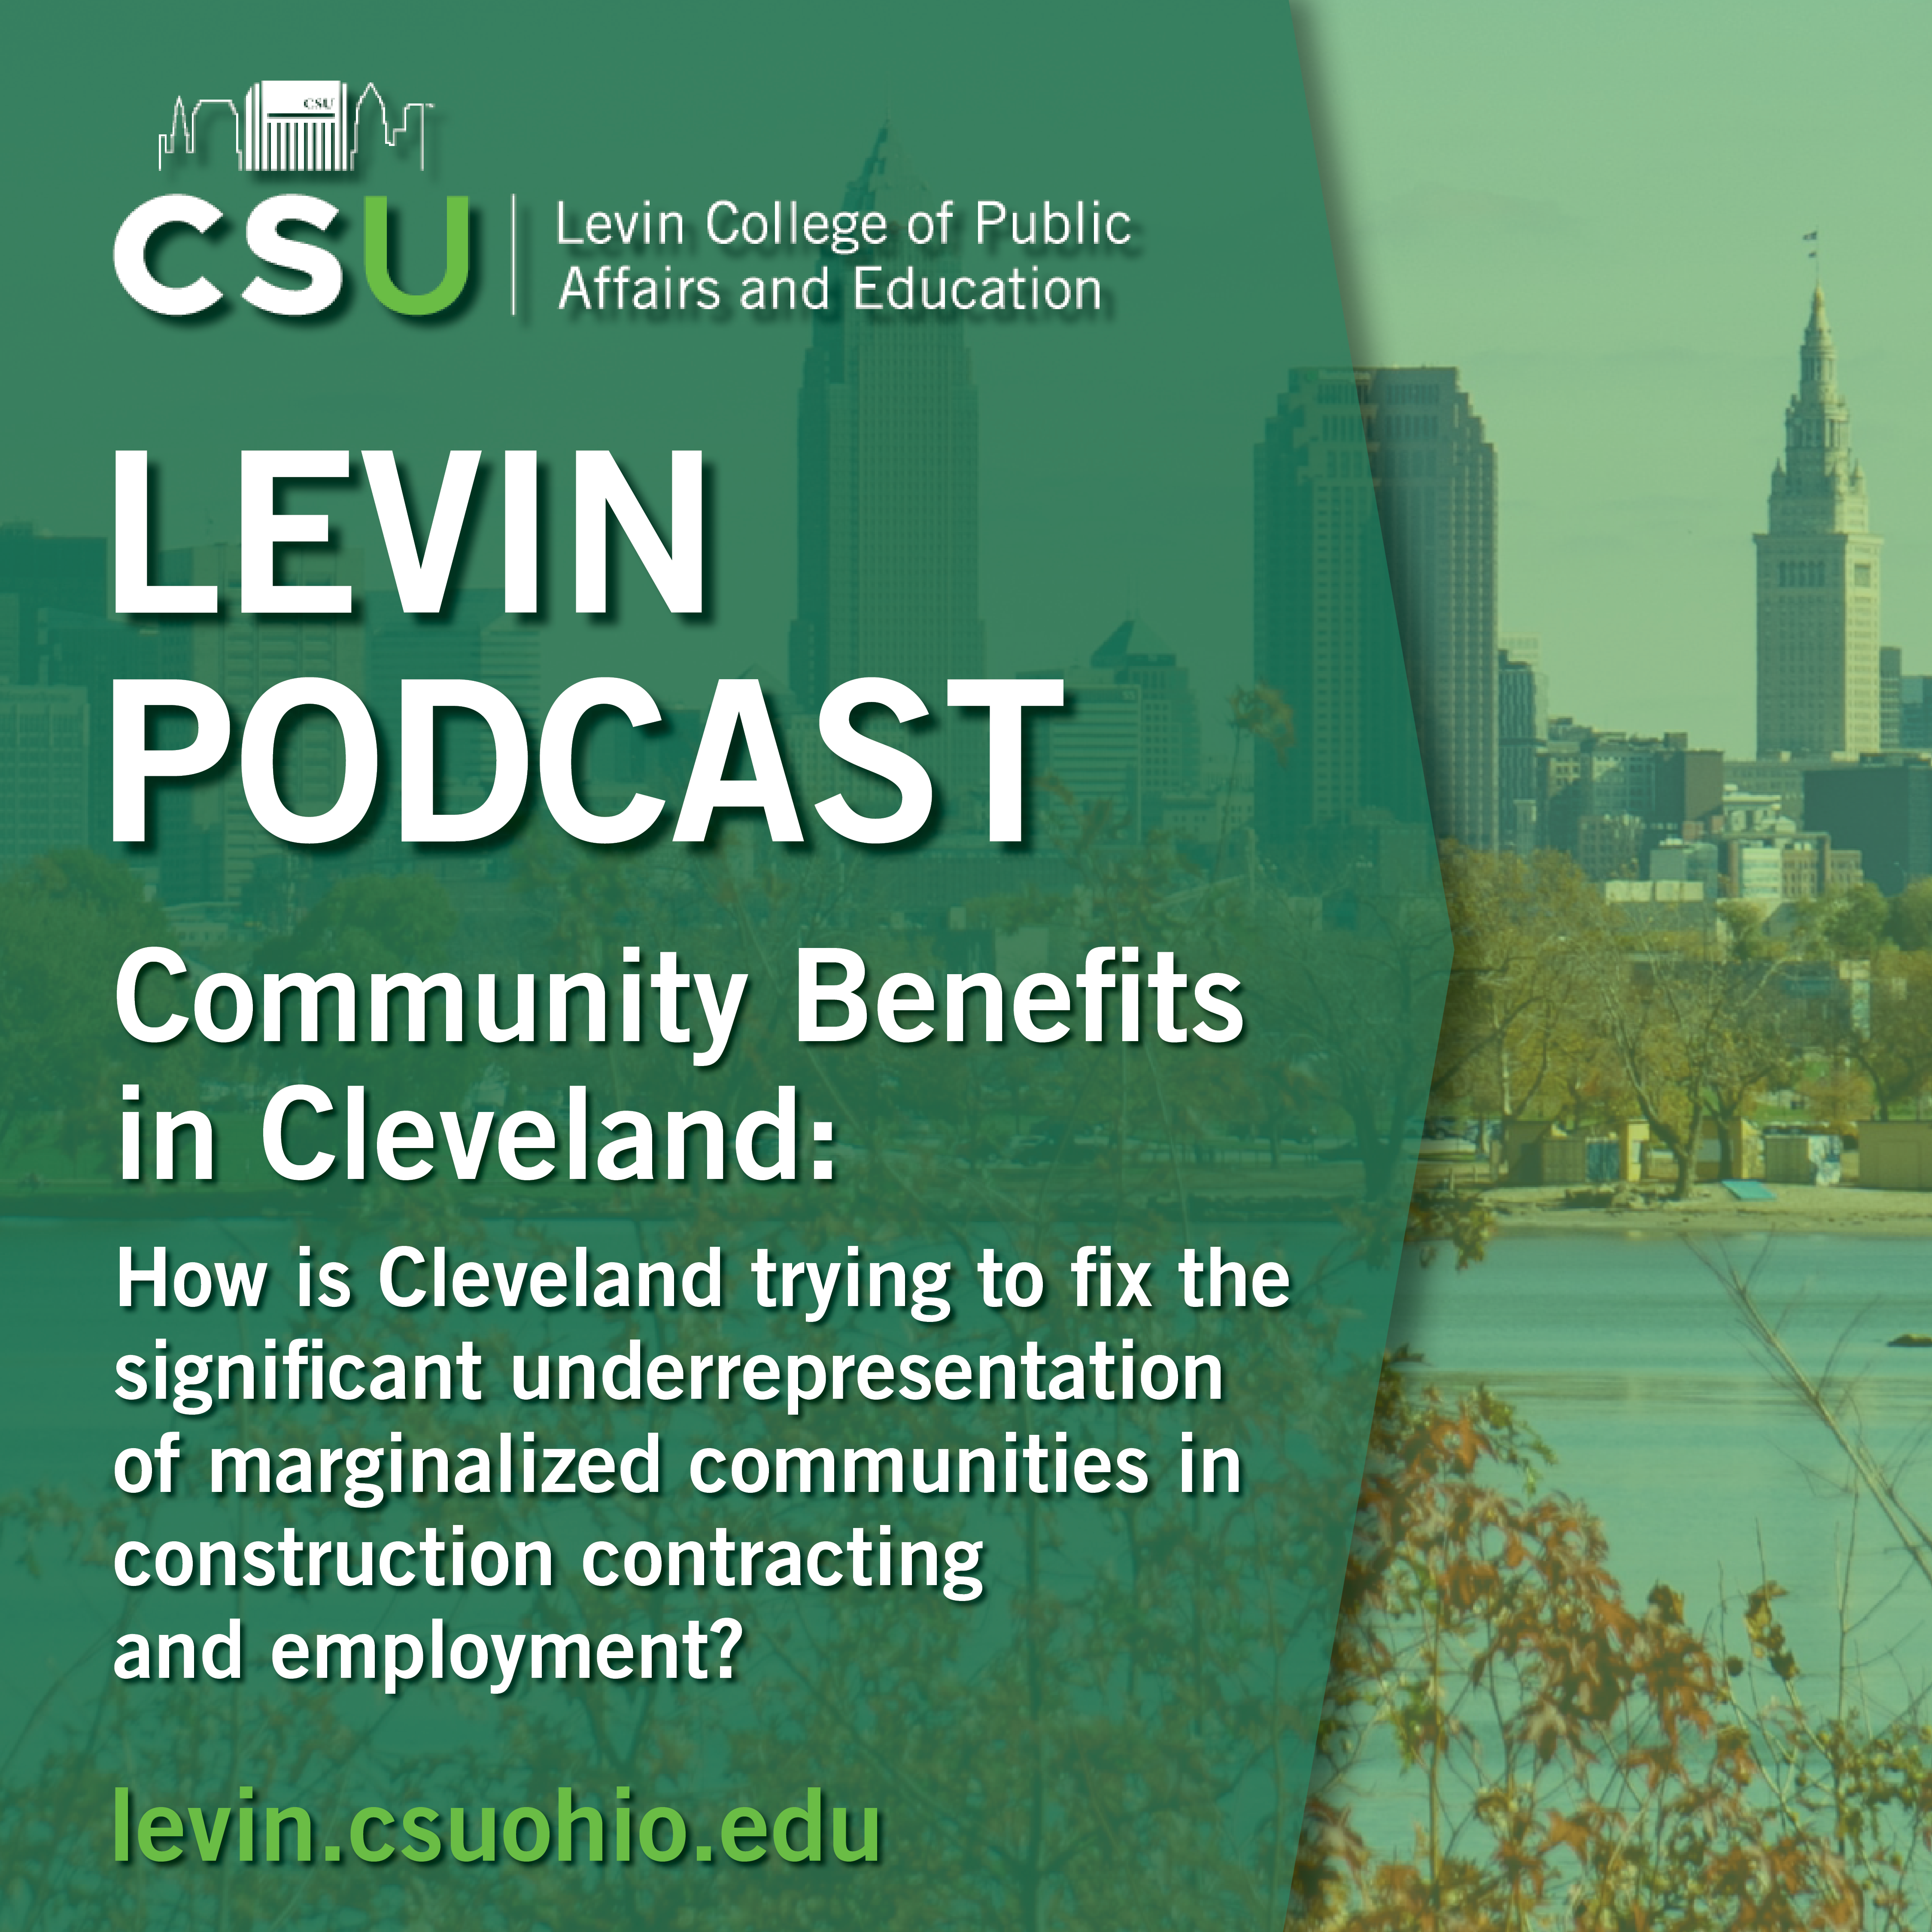 Levin Podcast: Community Benefits in Cleveland